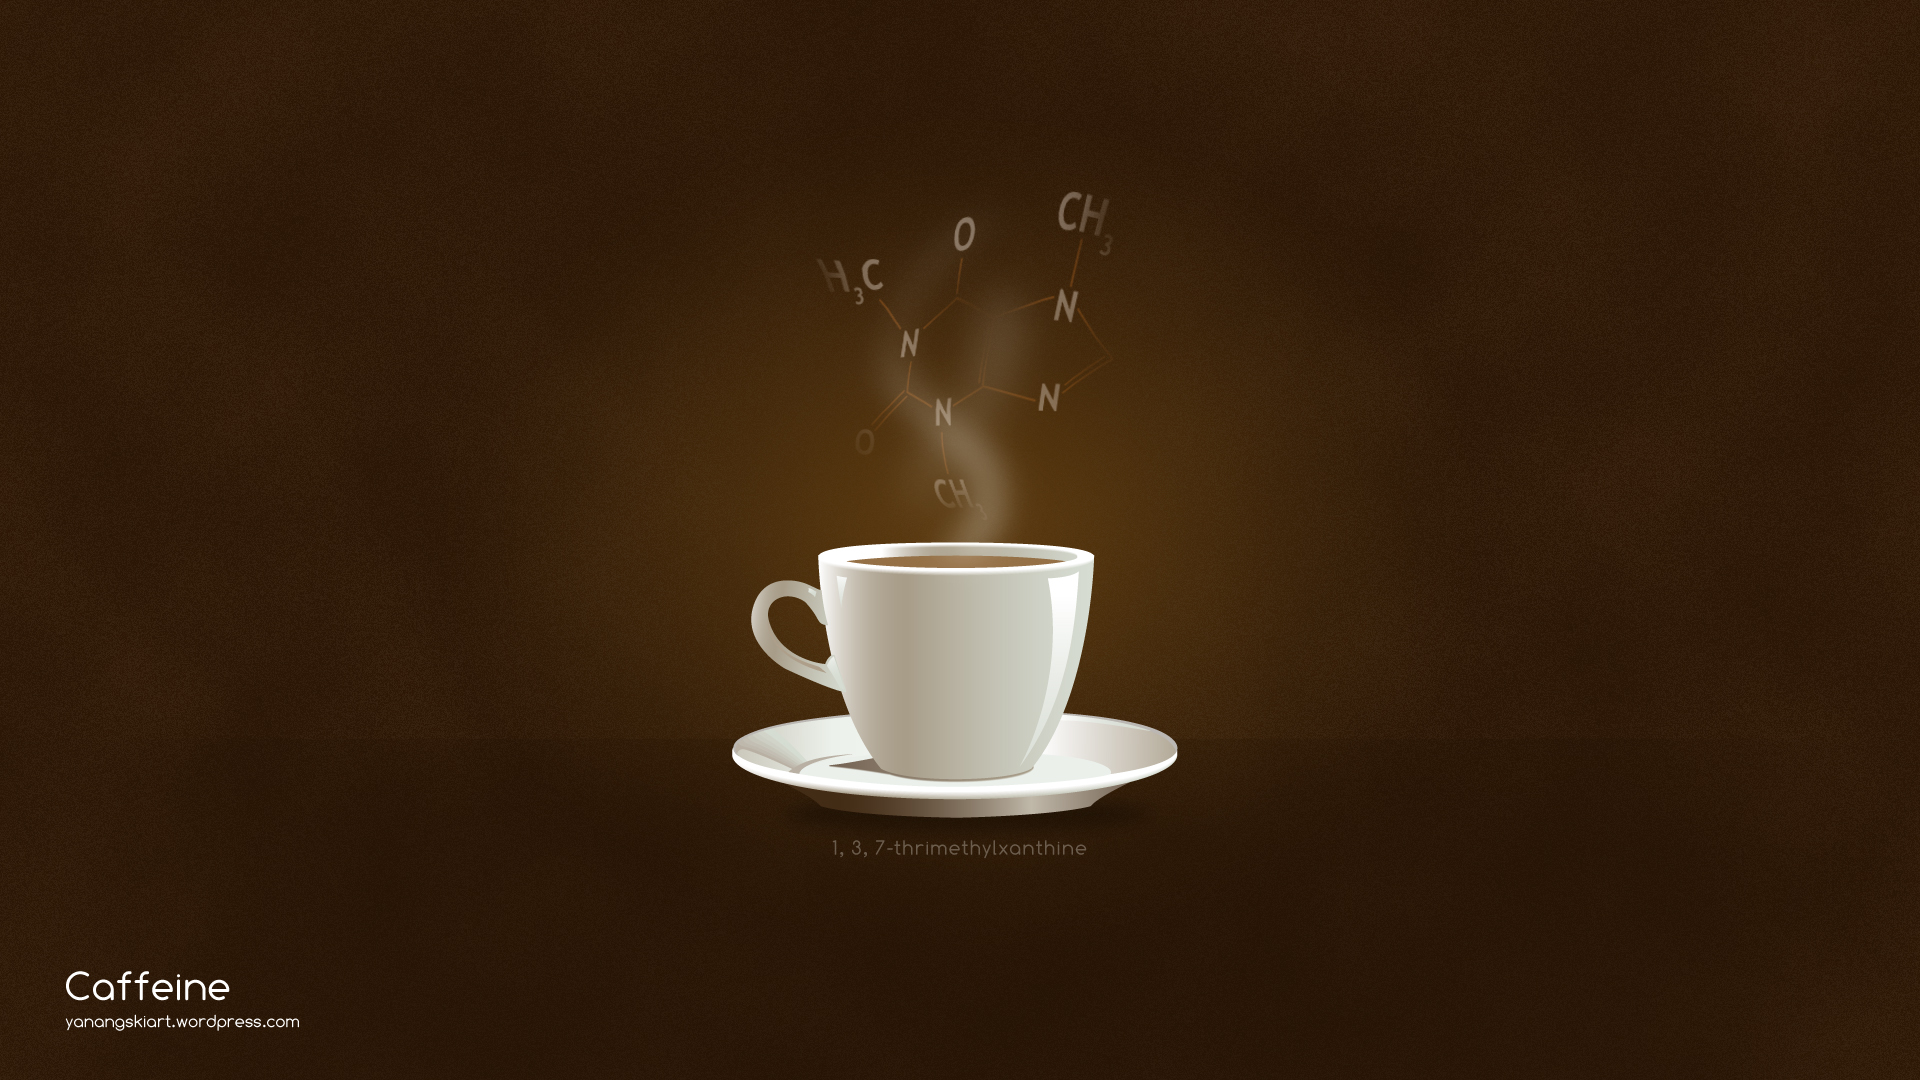 Coffee Cup wallpaper   427335 1920x1080